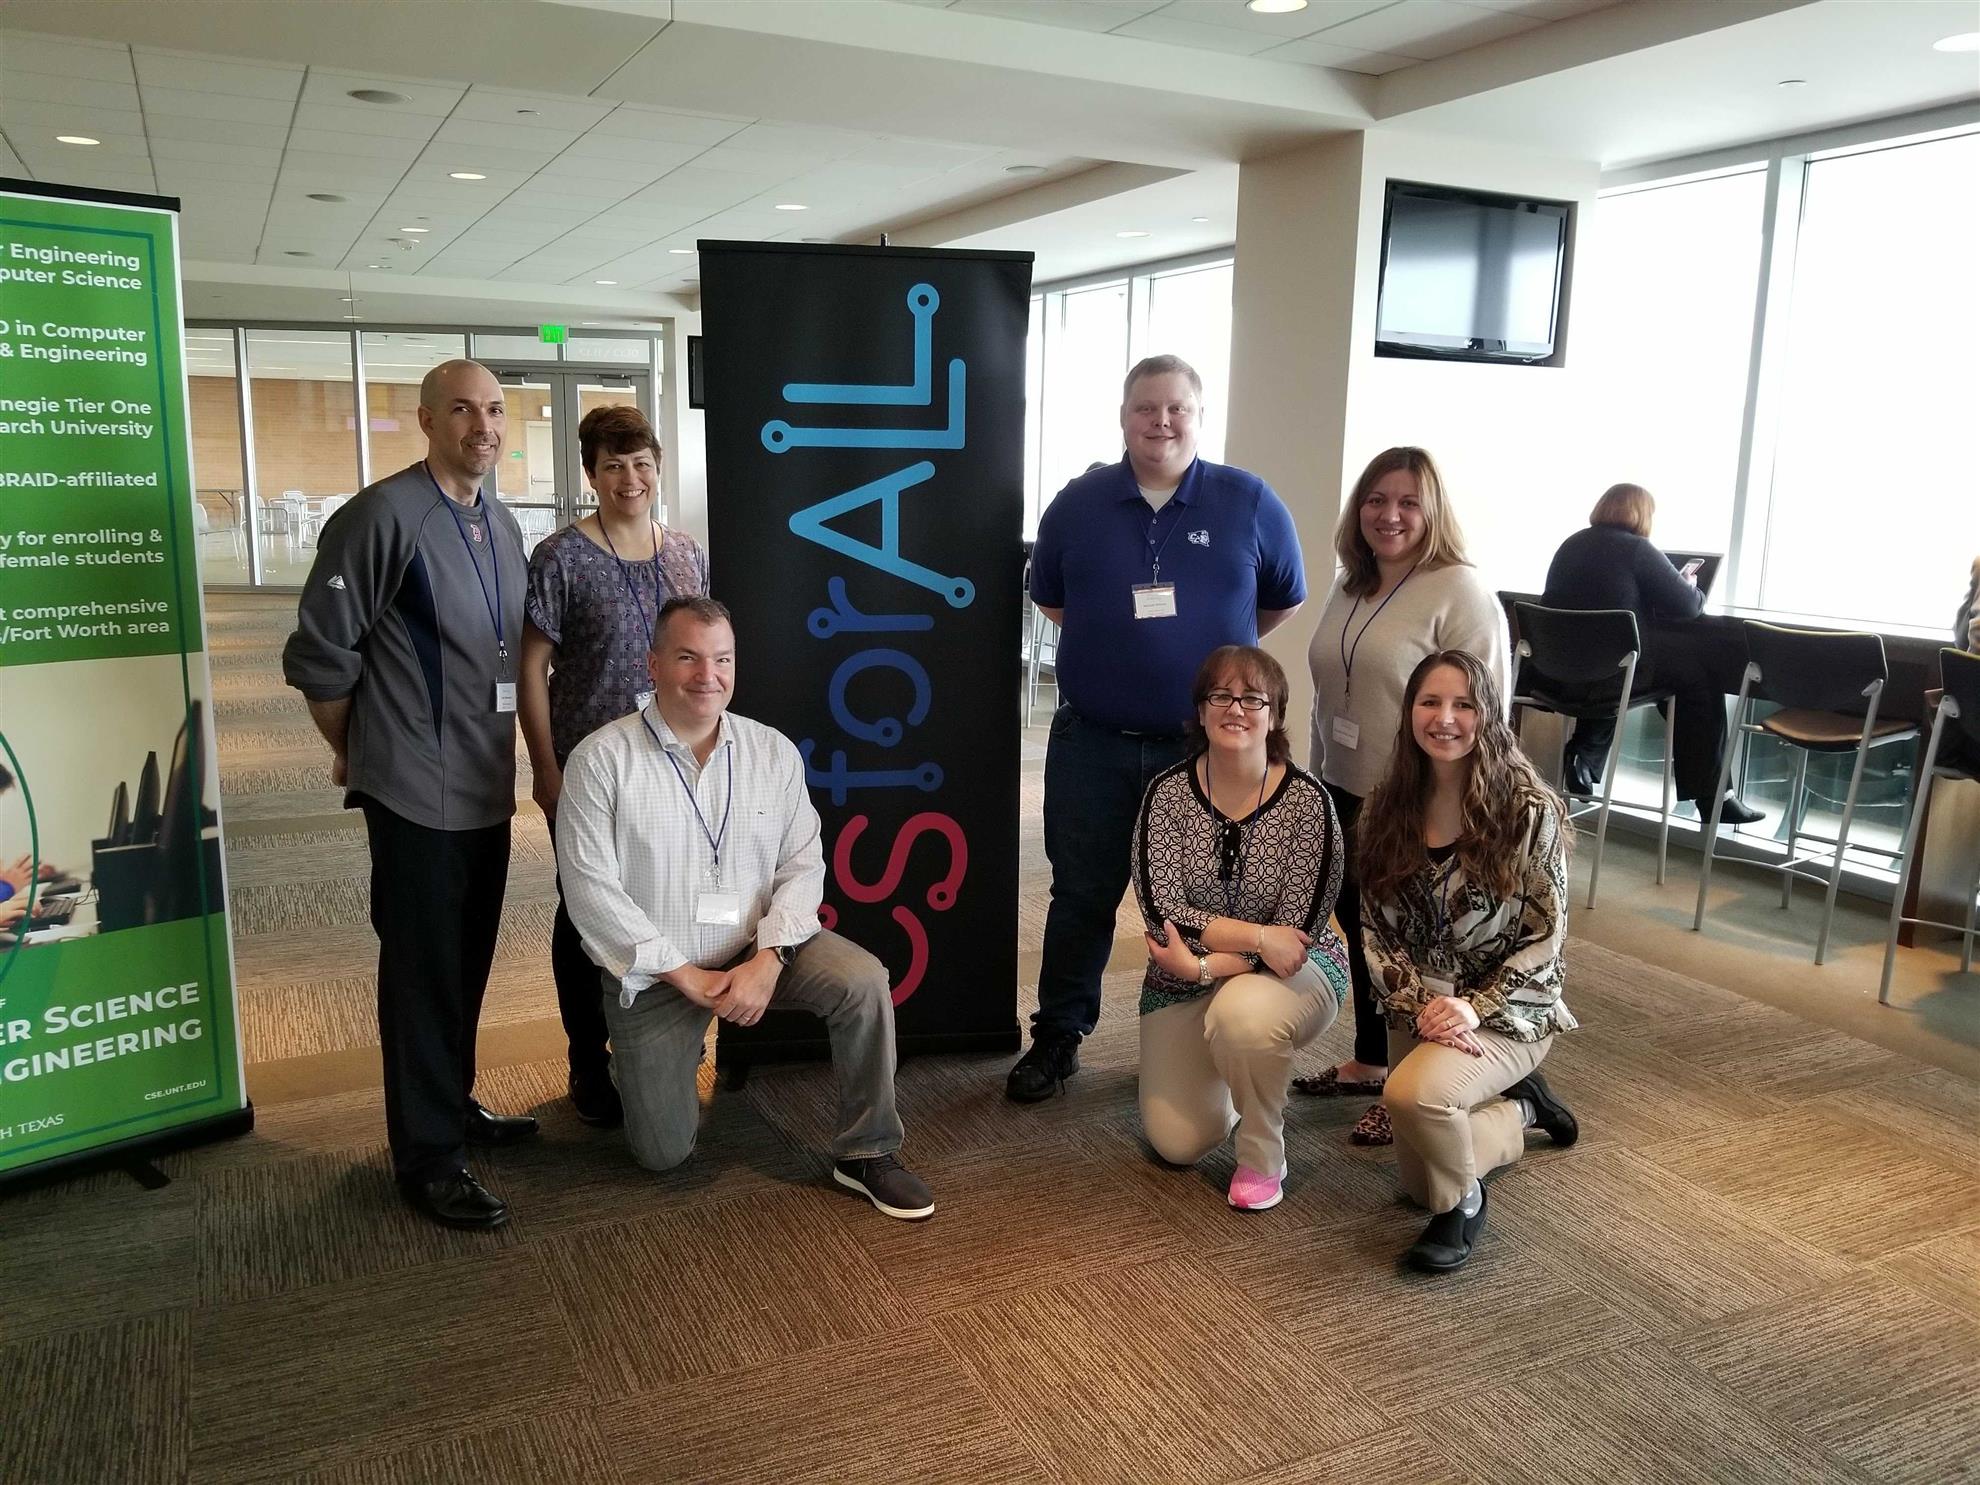 Group photo in front of CSforALL banner